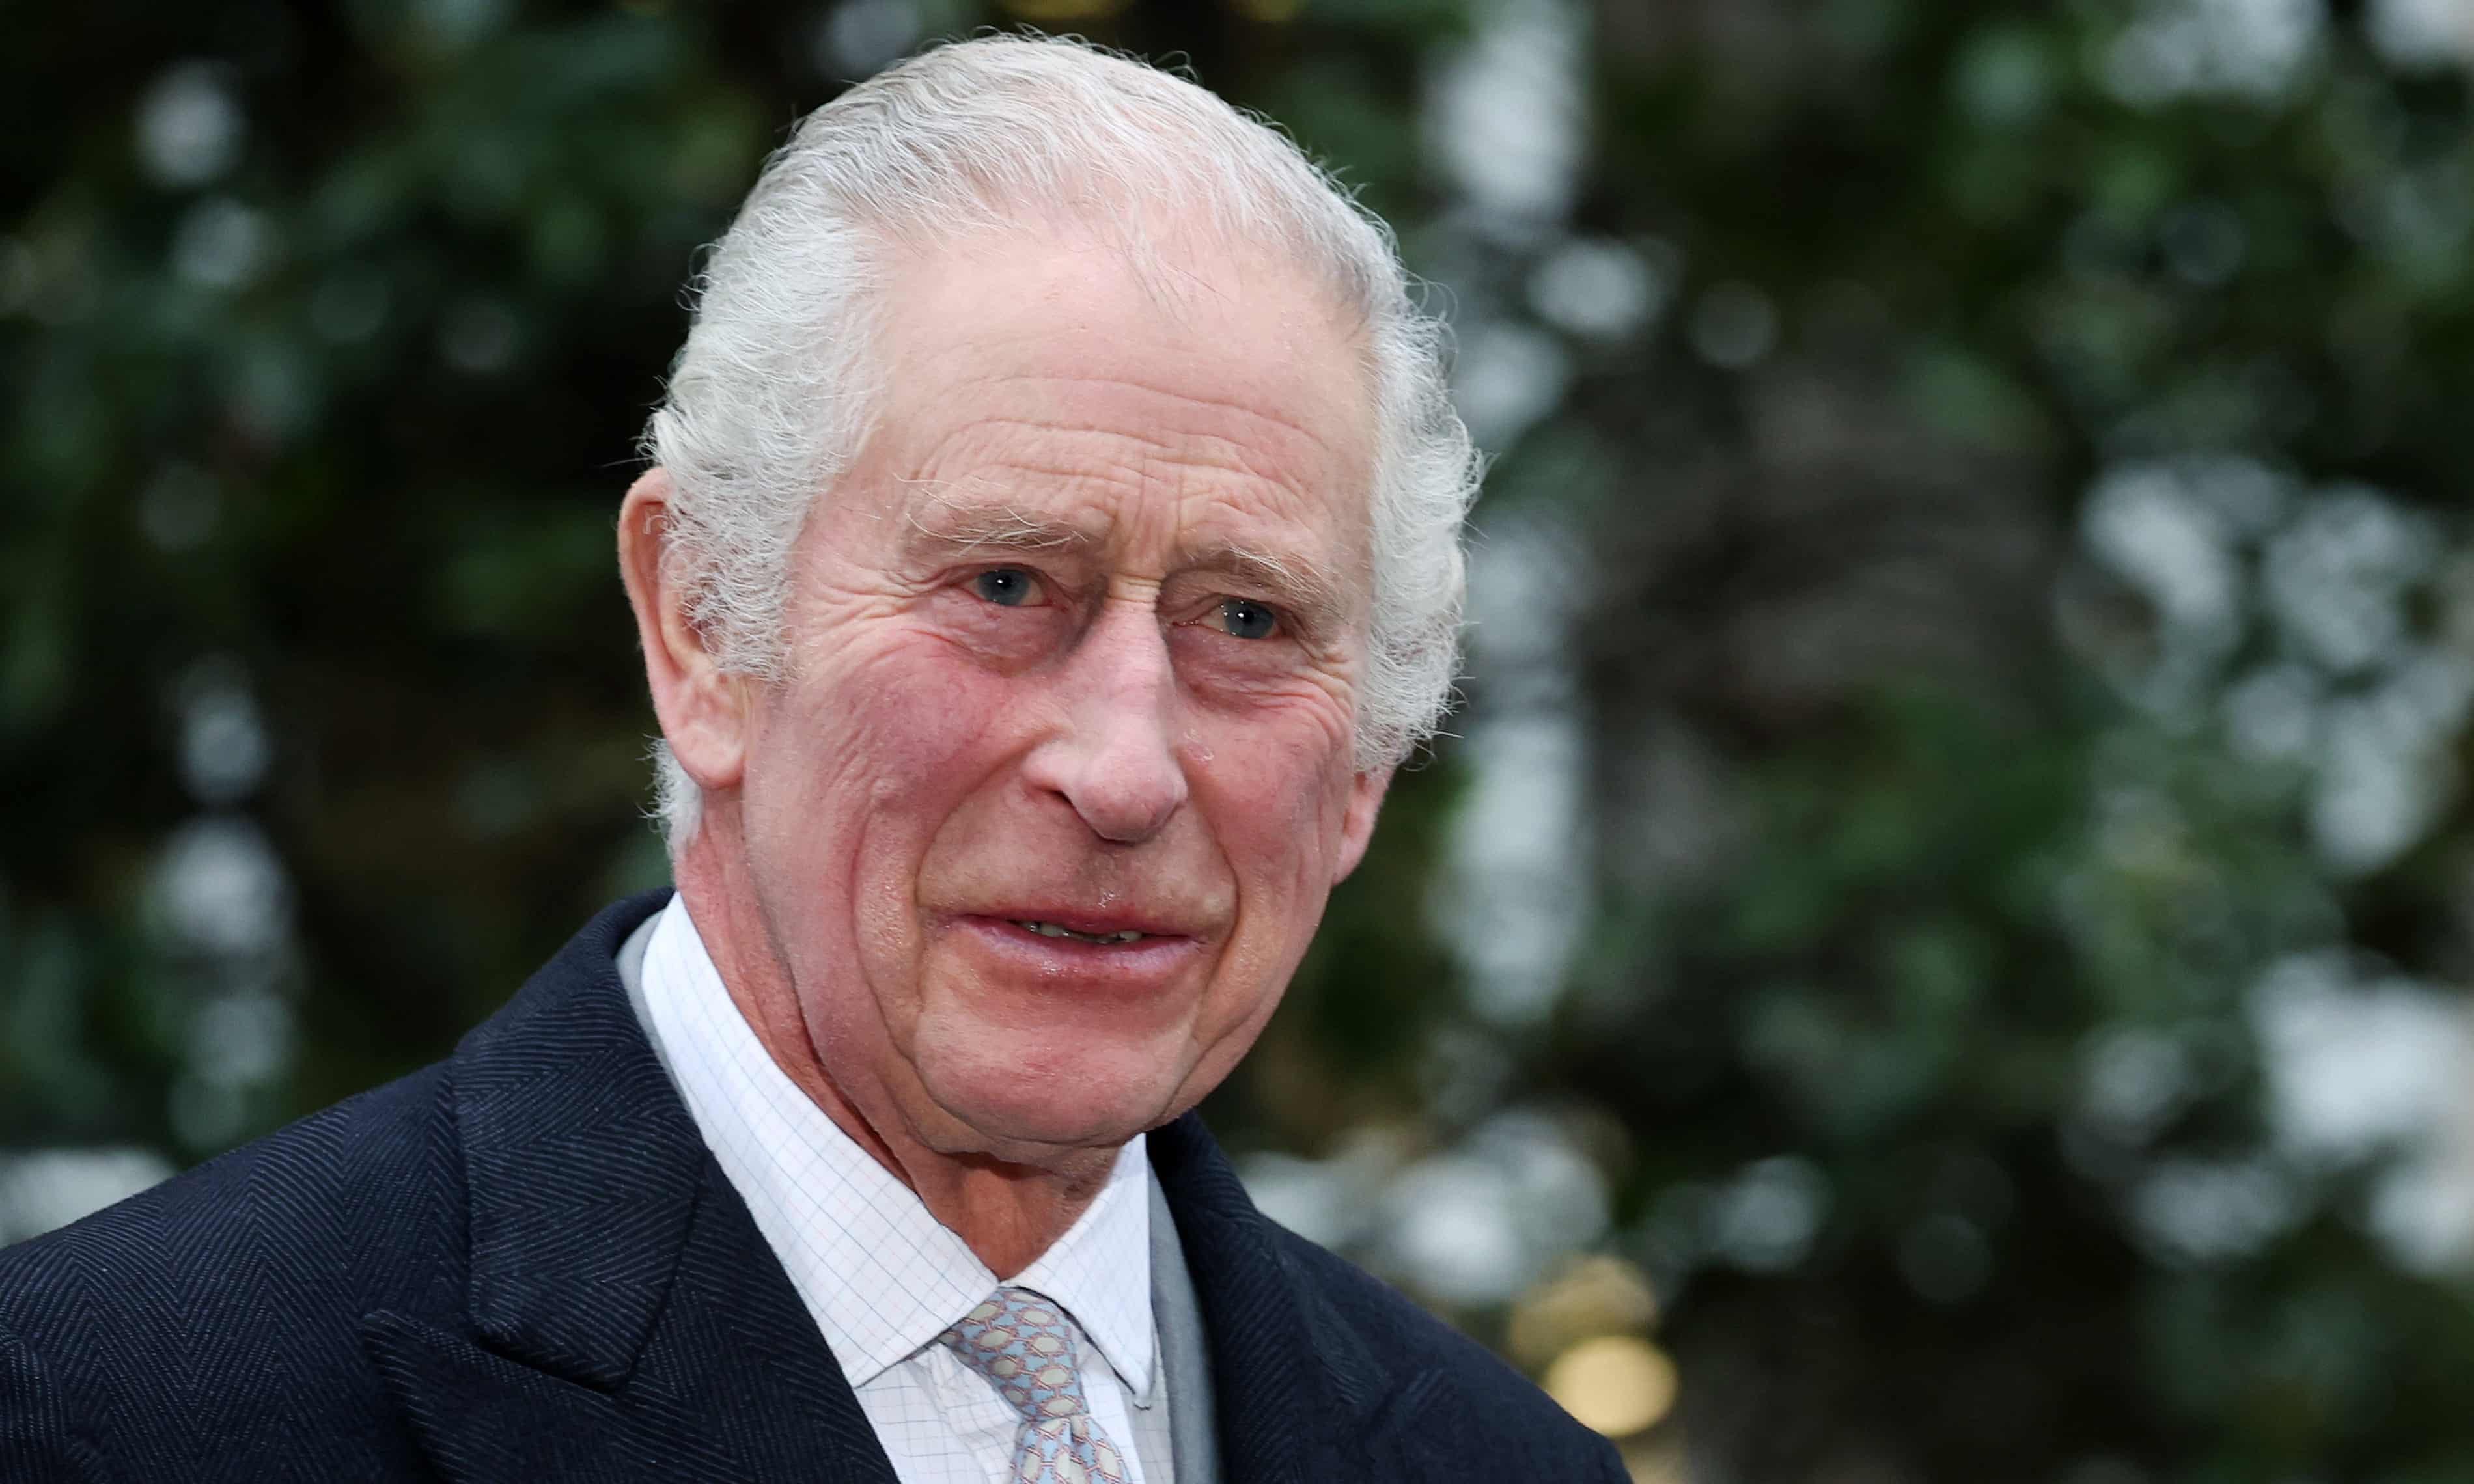 England’s King Charles III diagnosed with cancer, Buckingham Palace announces (theguardian.com)